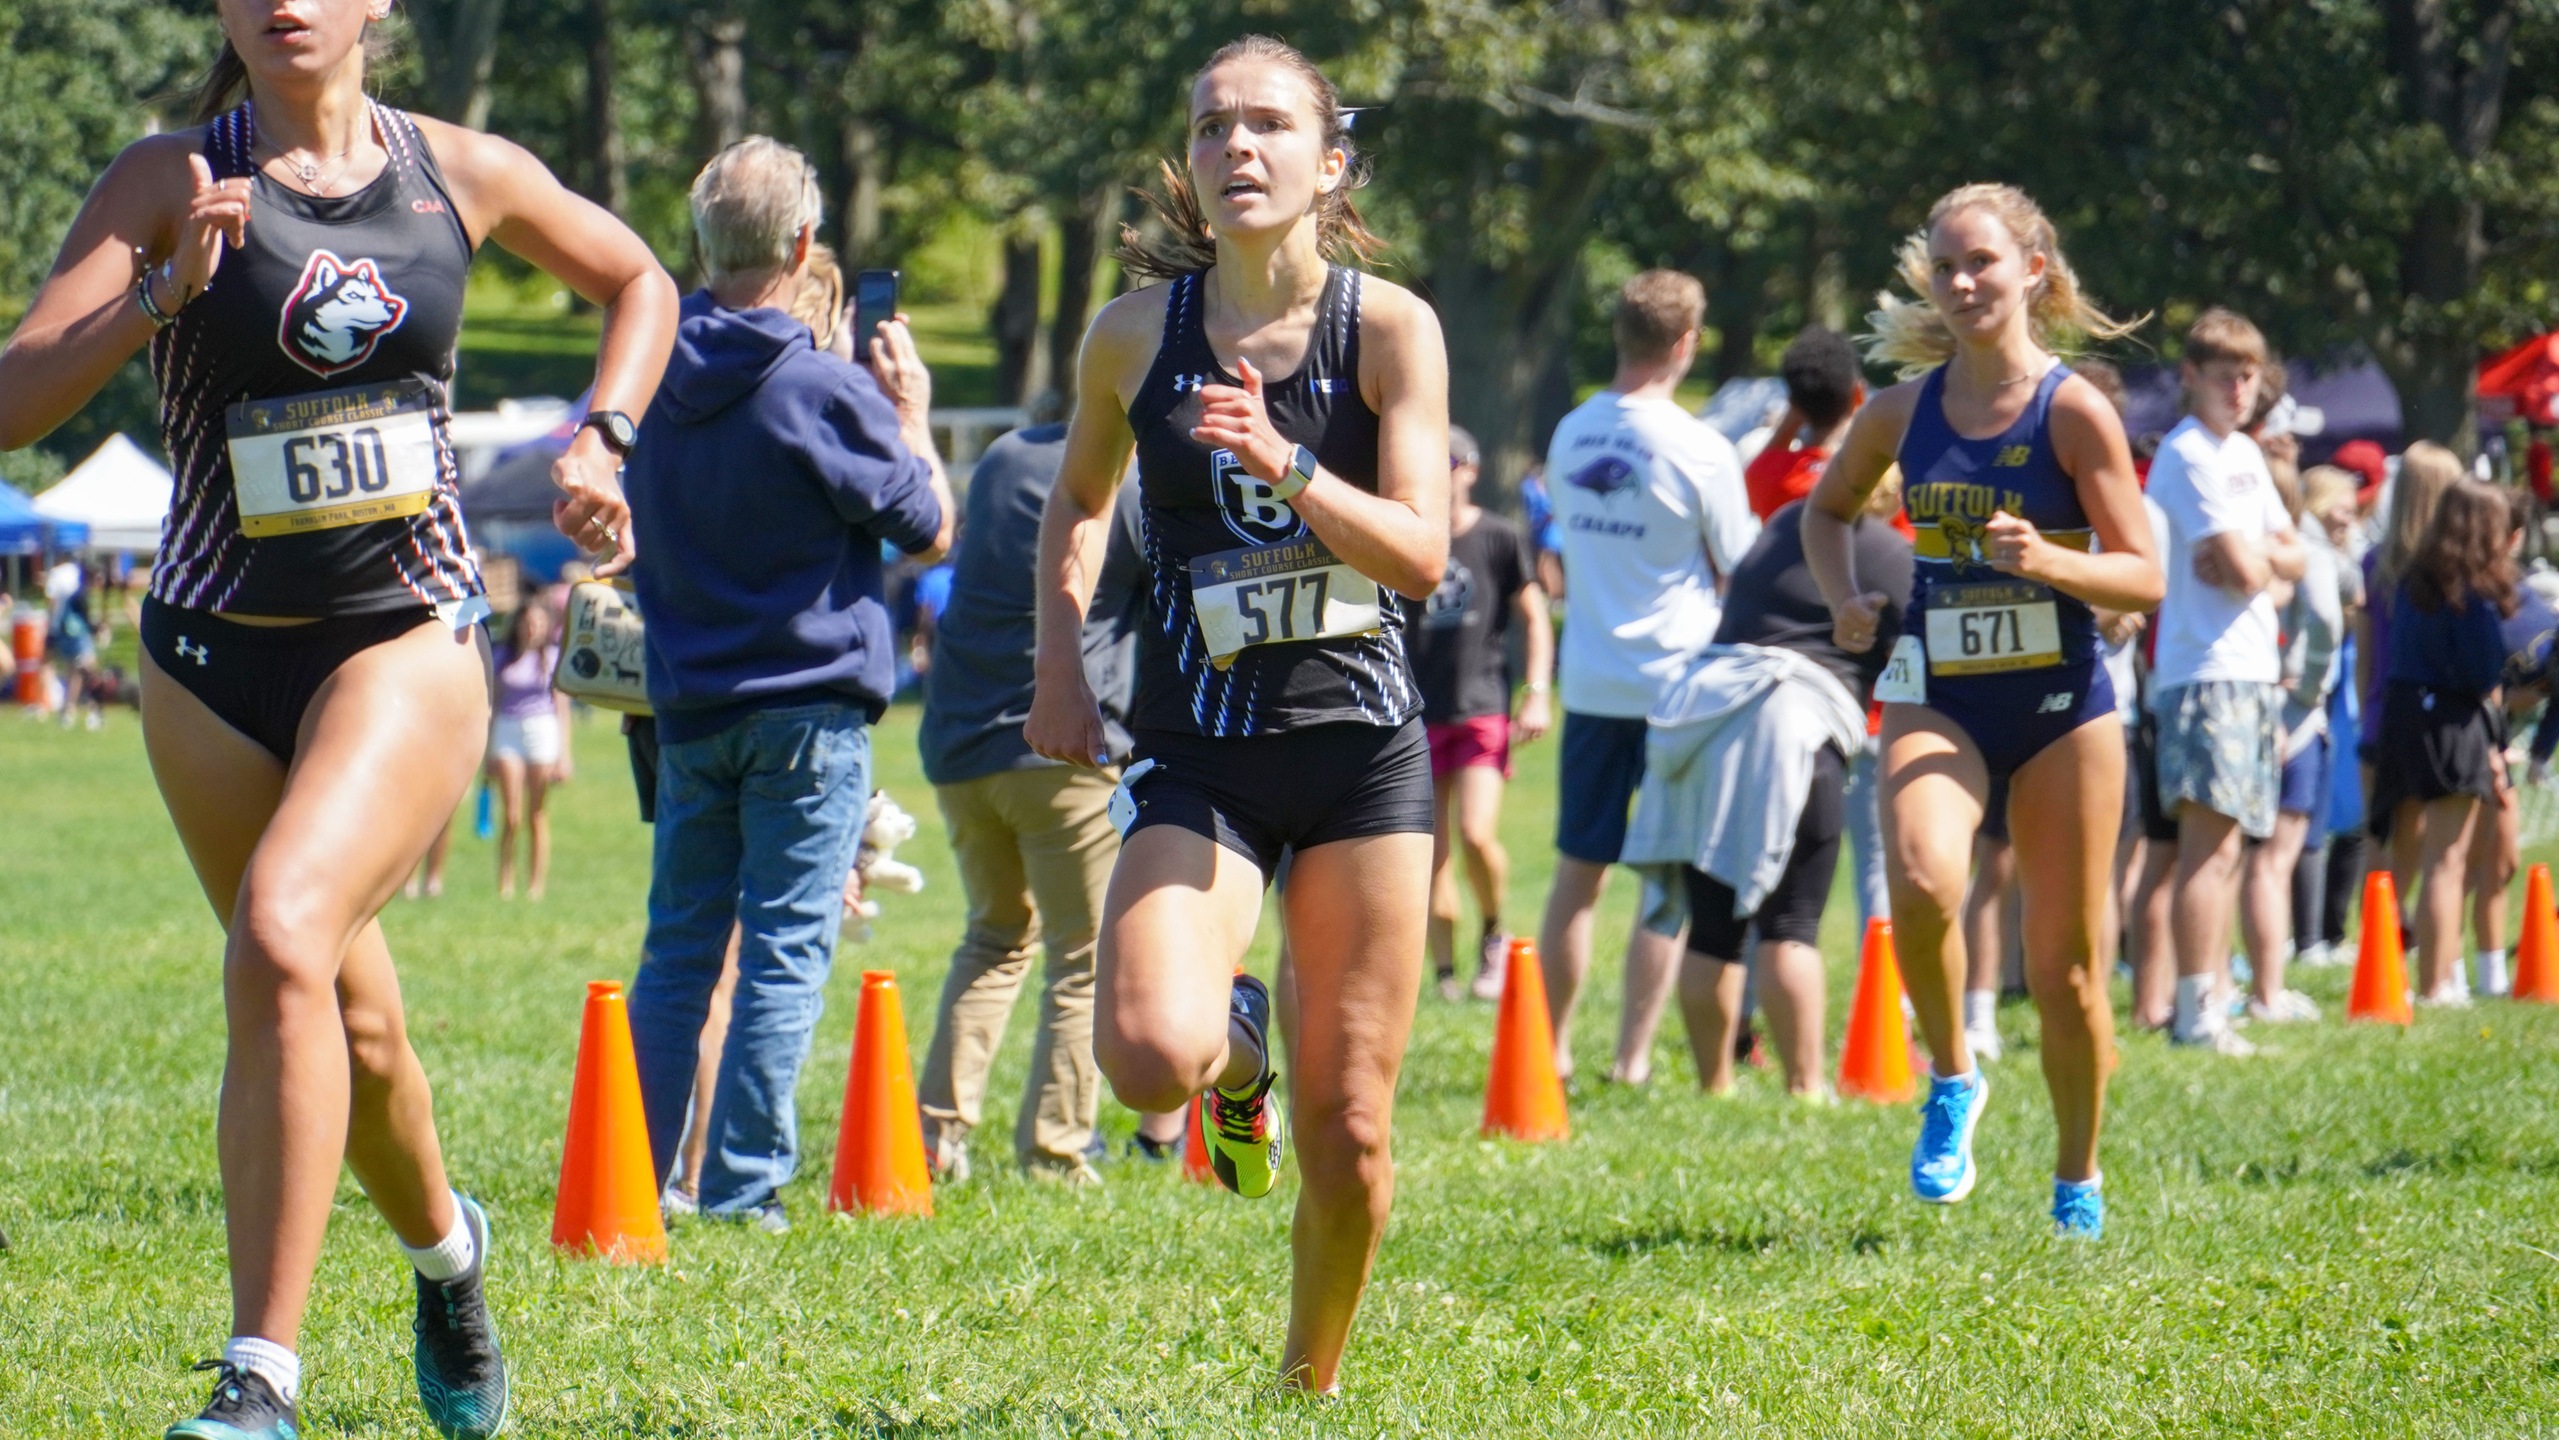 Pair of Falcons finish top-20 out of 147 runners